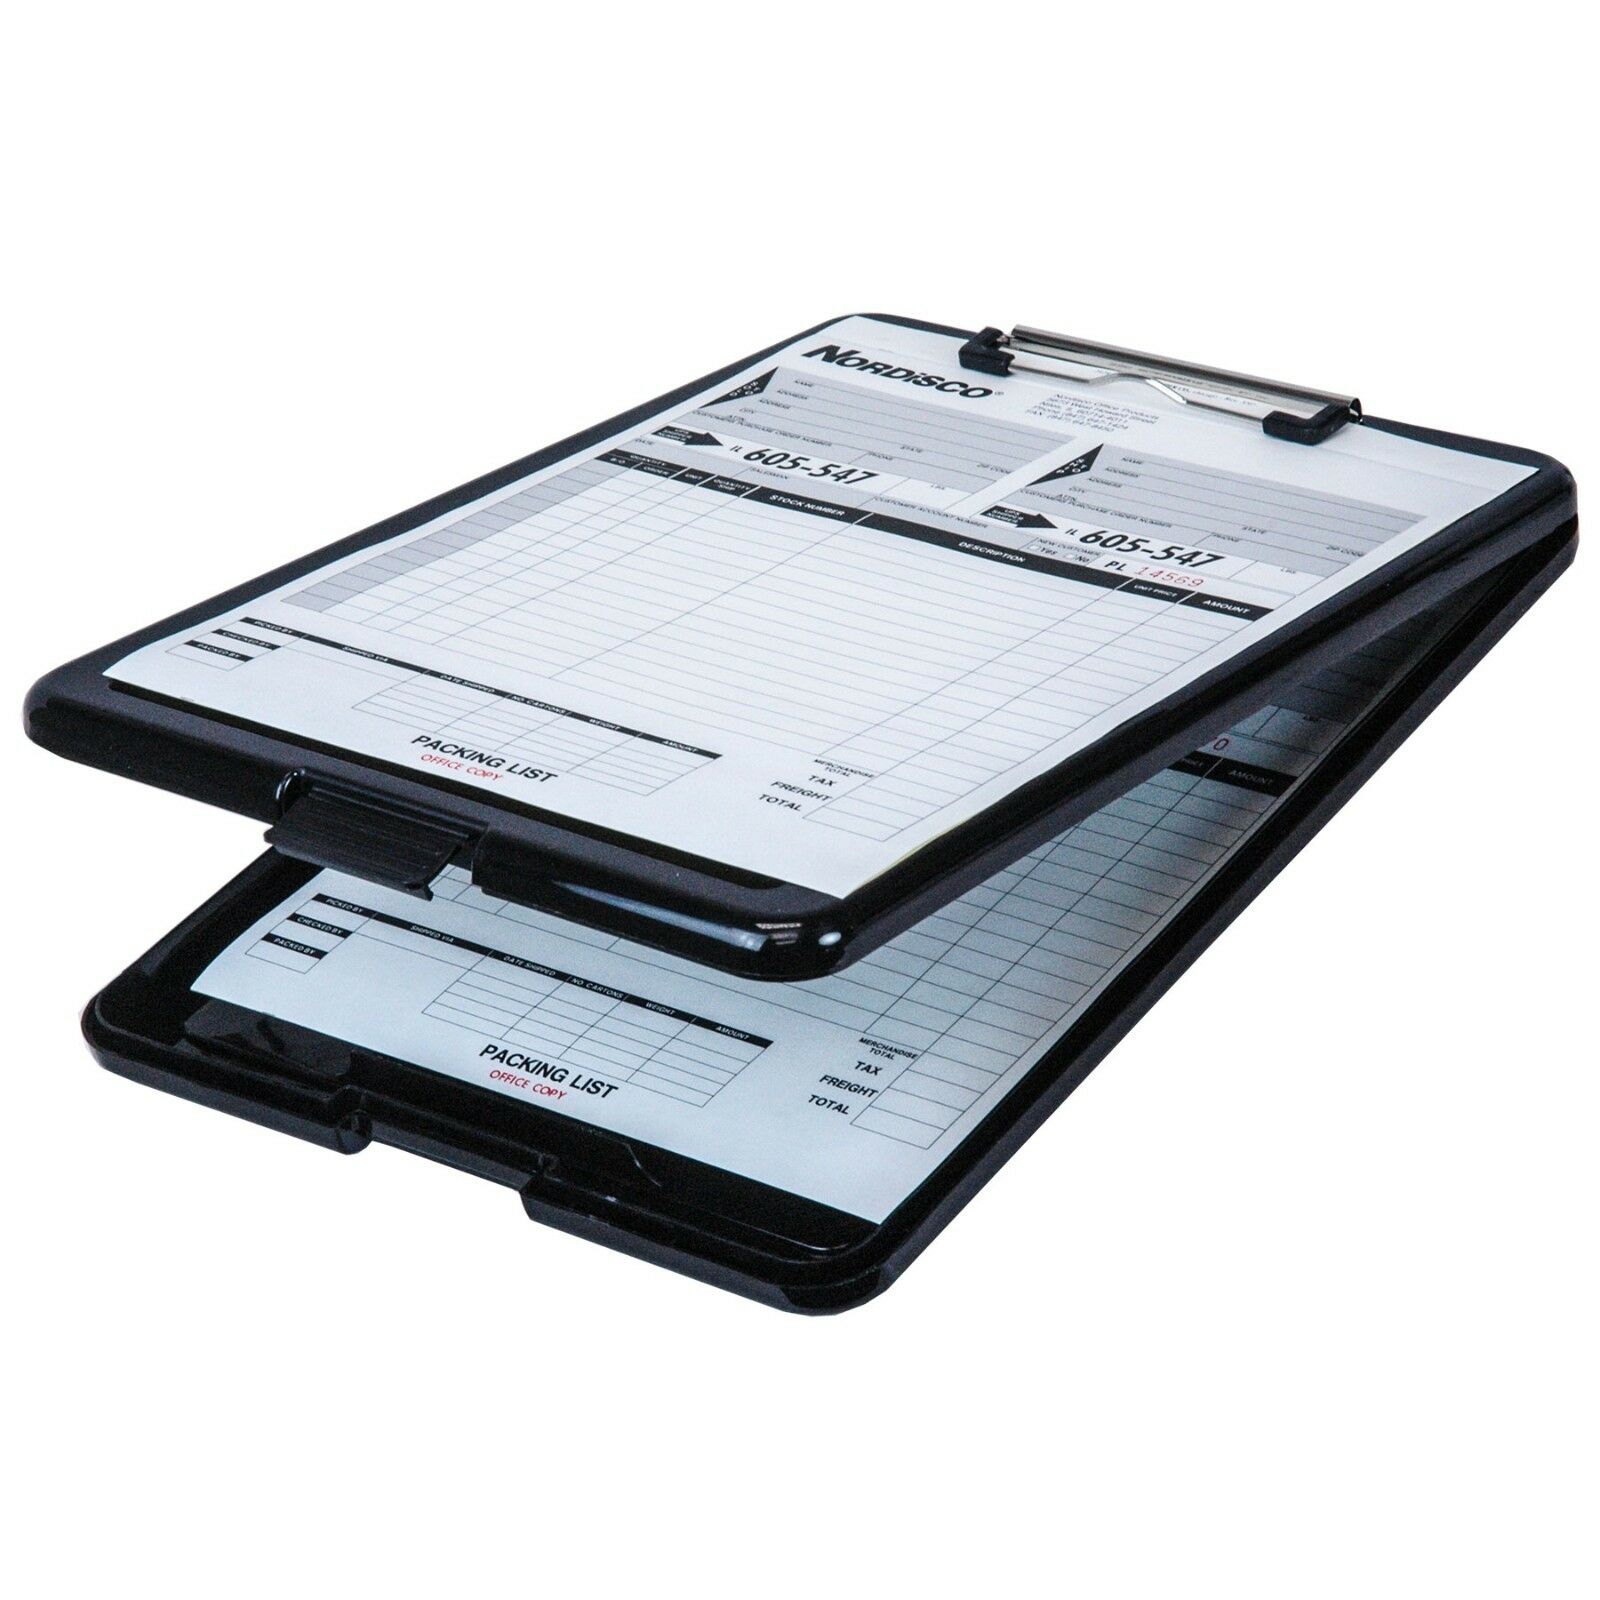 Business Source 37513 Clipboard With Storage, Black Plastic, 13-3/8 X 9-1/2"